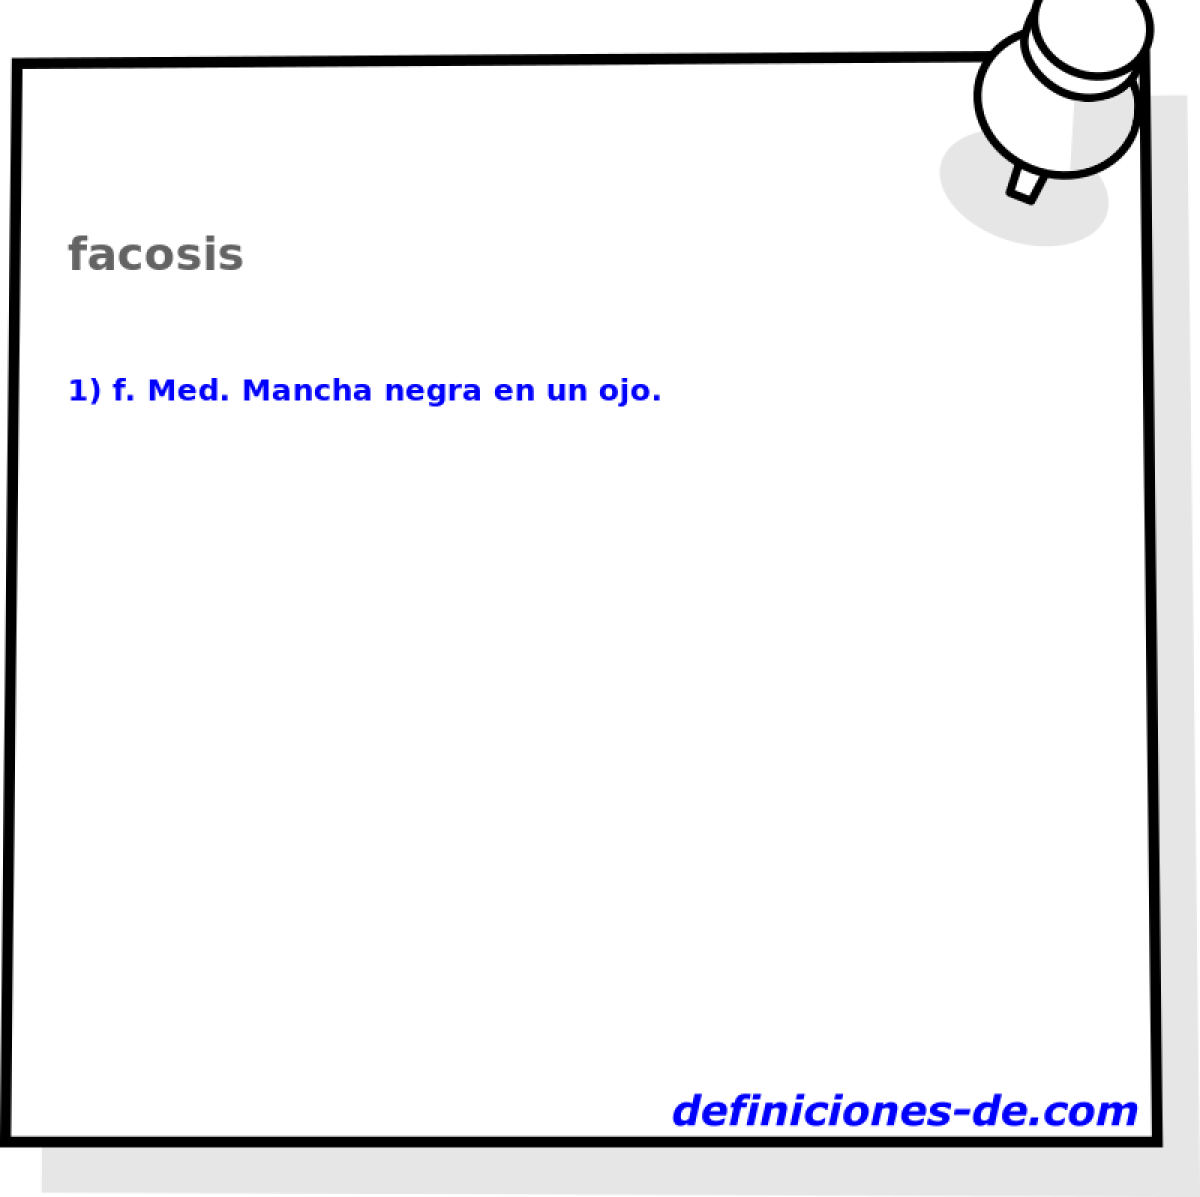 facosis 